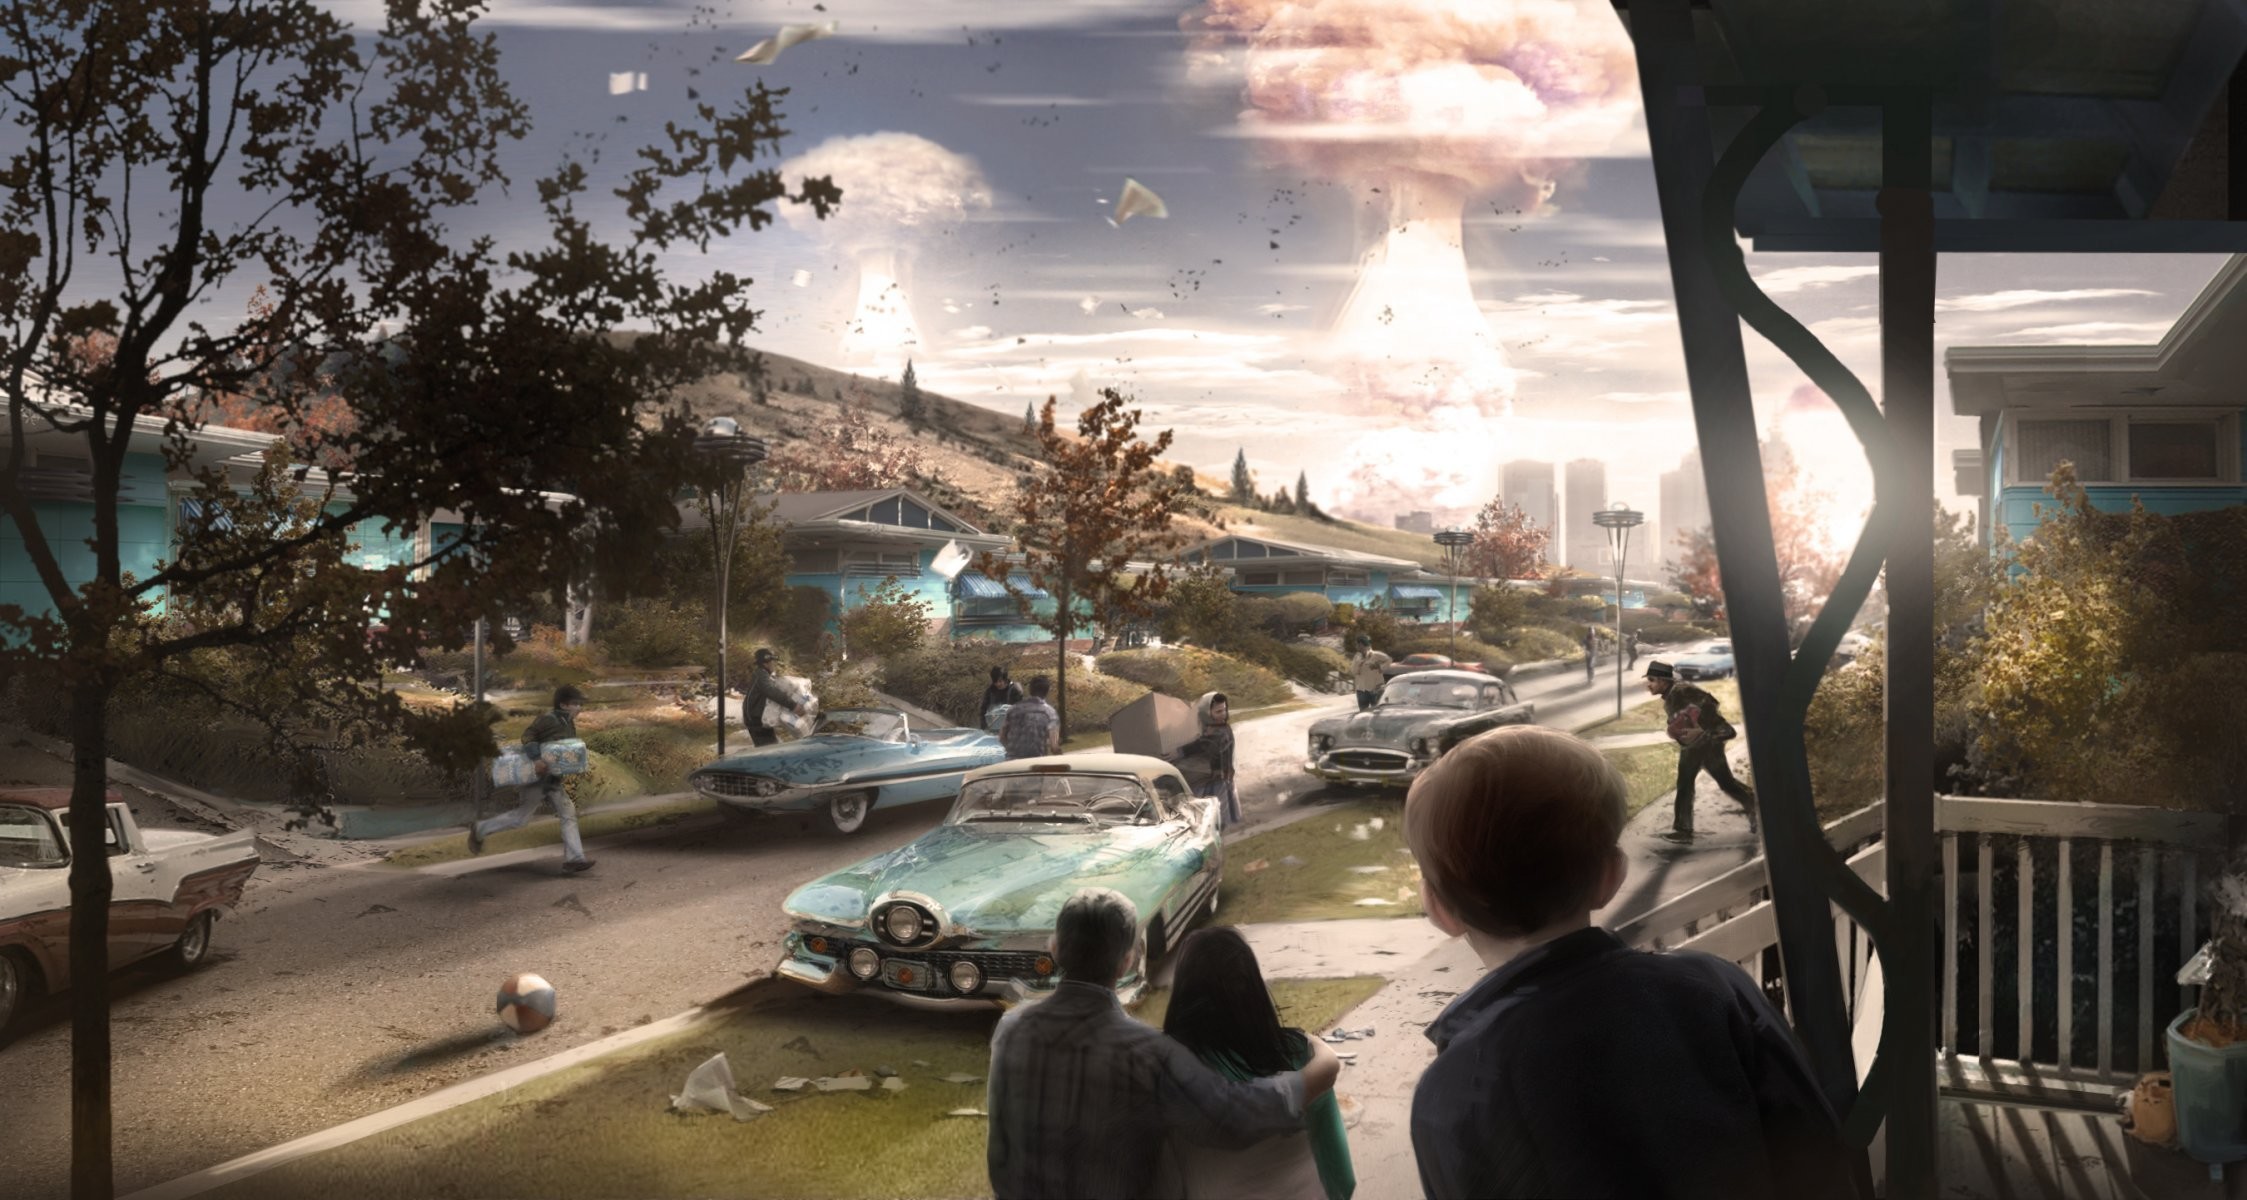 2247x1200 nuclear explosion explosion town street house machinery people panic  fallout 4 concept fallout concept art bethesda